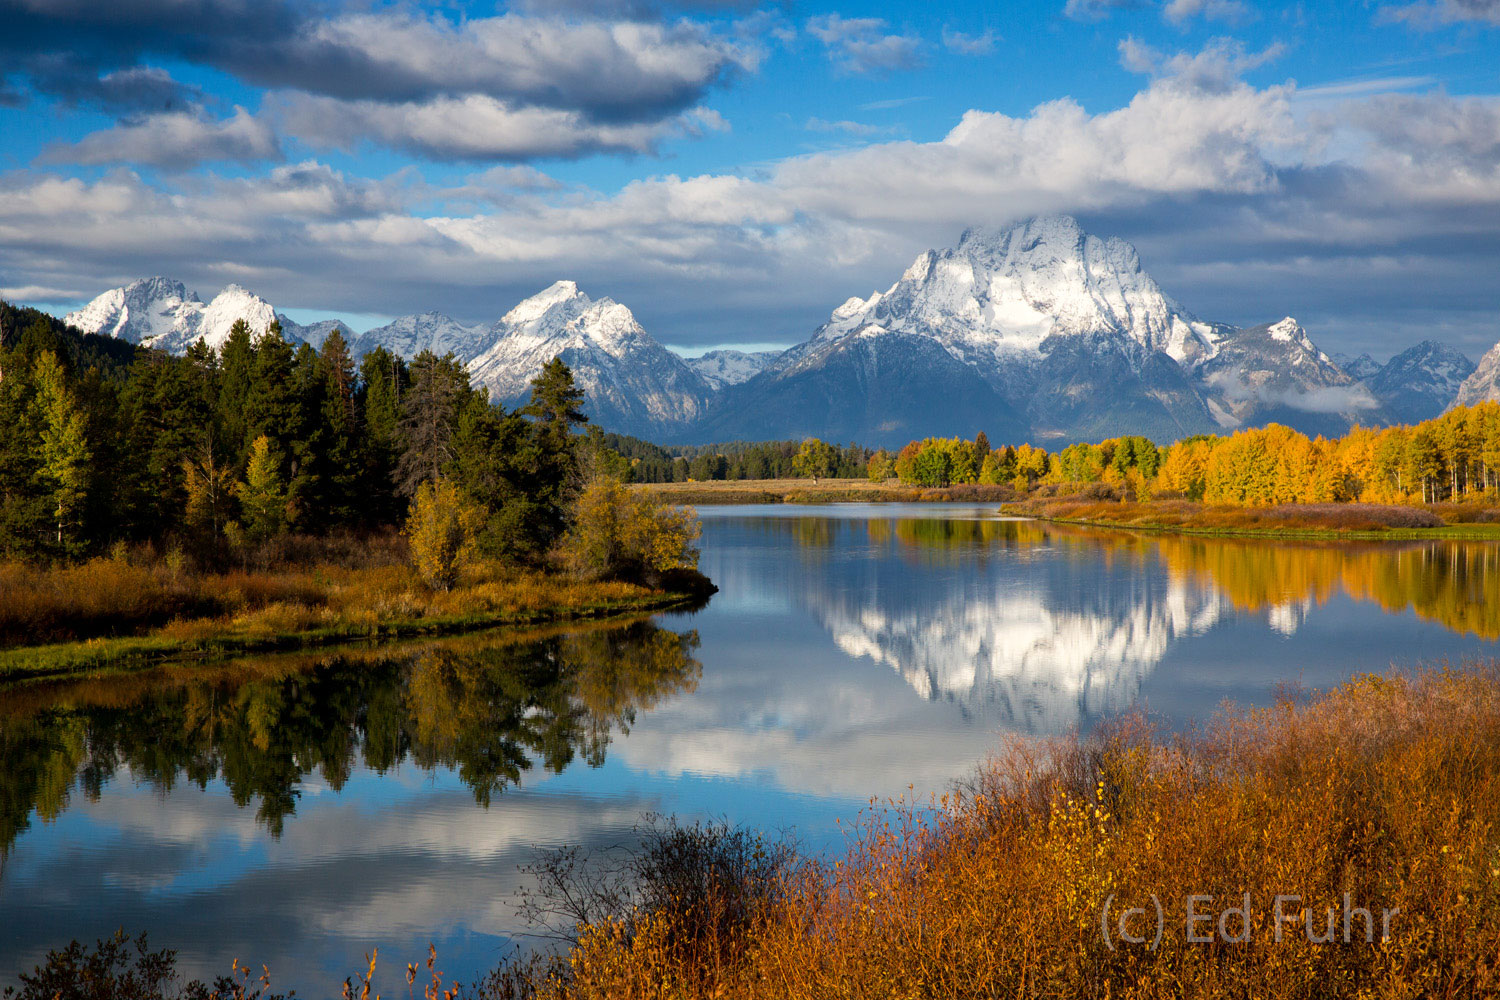 Fall colors have peaked just as a fresh snow has coated Mt. Moran.  The slow-moving waters of the Snake River at Oxbow Bend have...